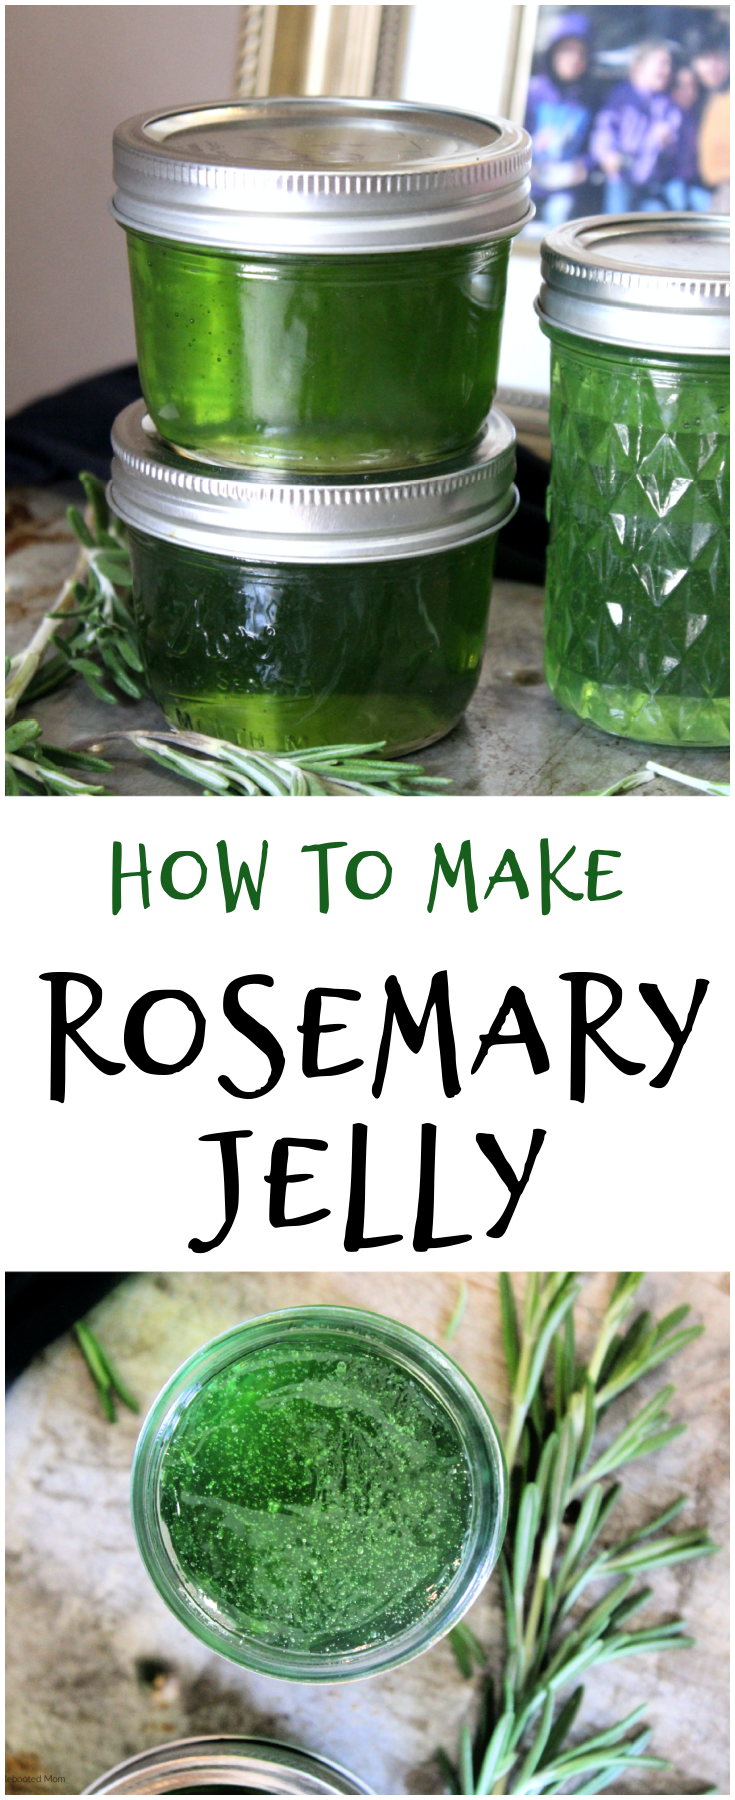 This savory Rosemary Jelly is a unique and delicious twist on traditional jelly recipes - serve with your next cheeseboard as an appetizer!